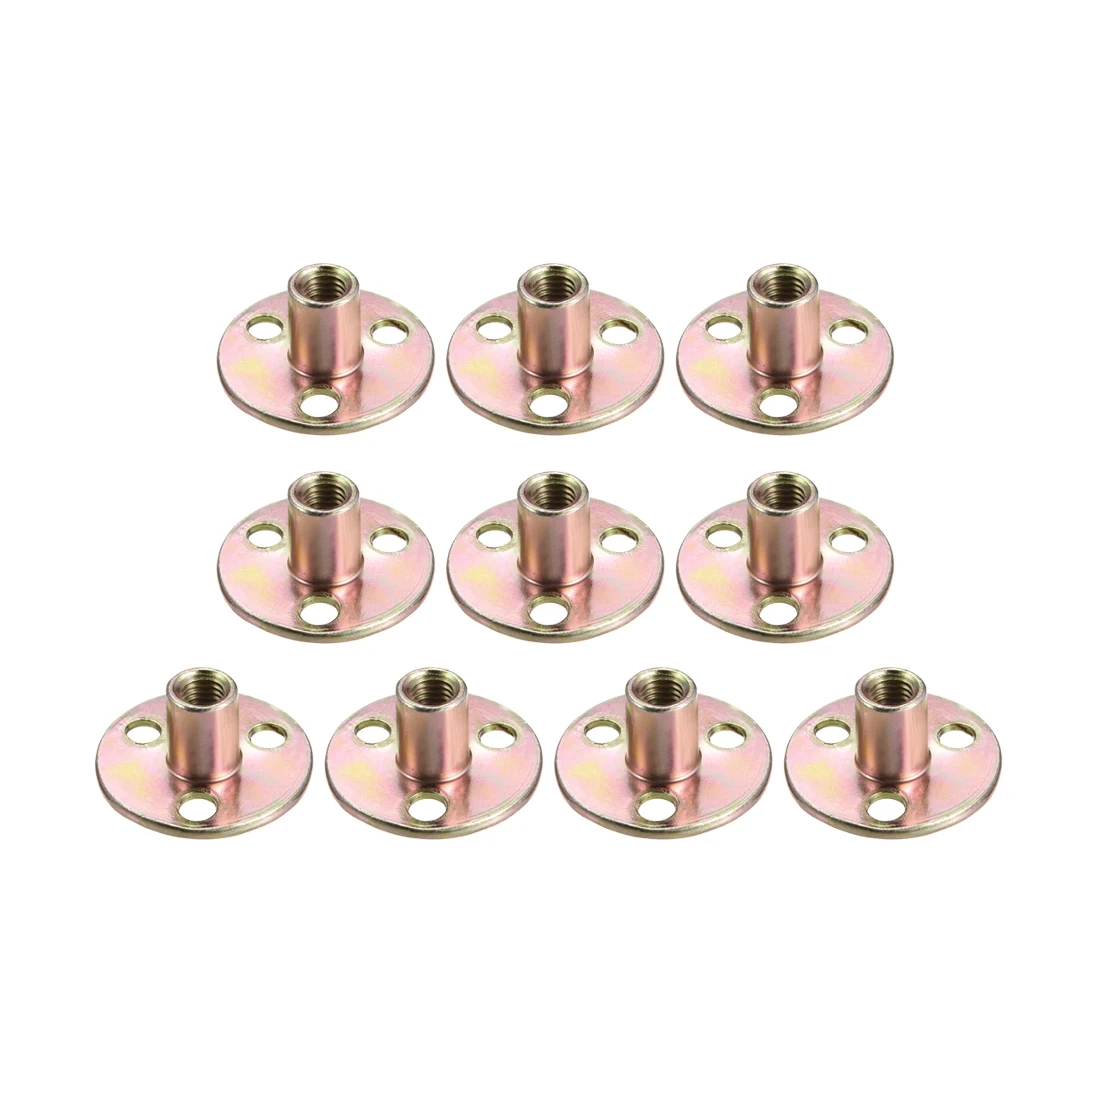 M8-64PCS Hilitchi 64PCS M8 Brad Hole Tee Nut Carbon Steel Screw in T Nuts Round Base Mounting Hardware Fitting Fastener Flange Insert Female Thread with Screws 